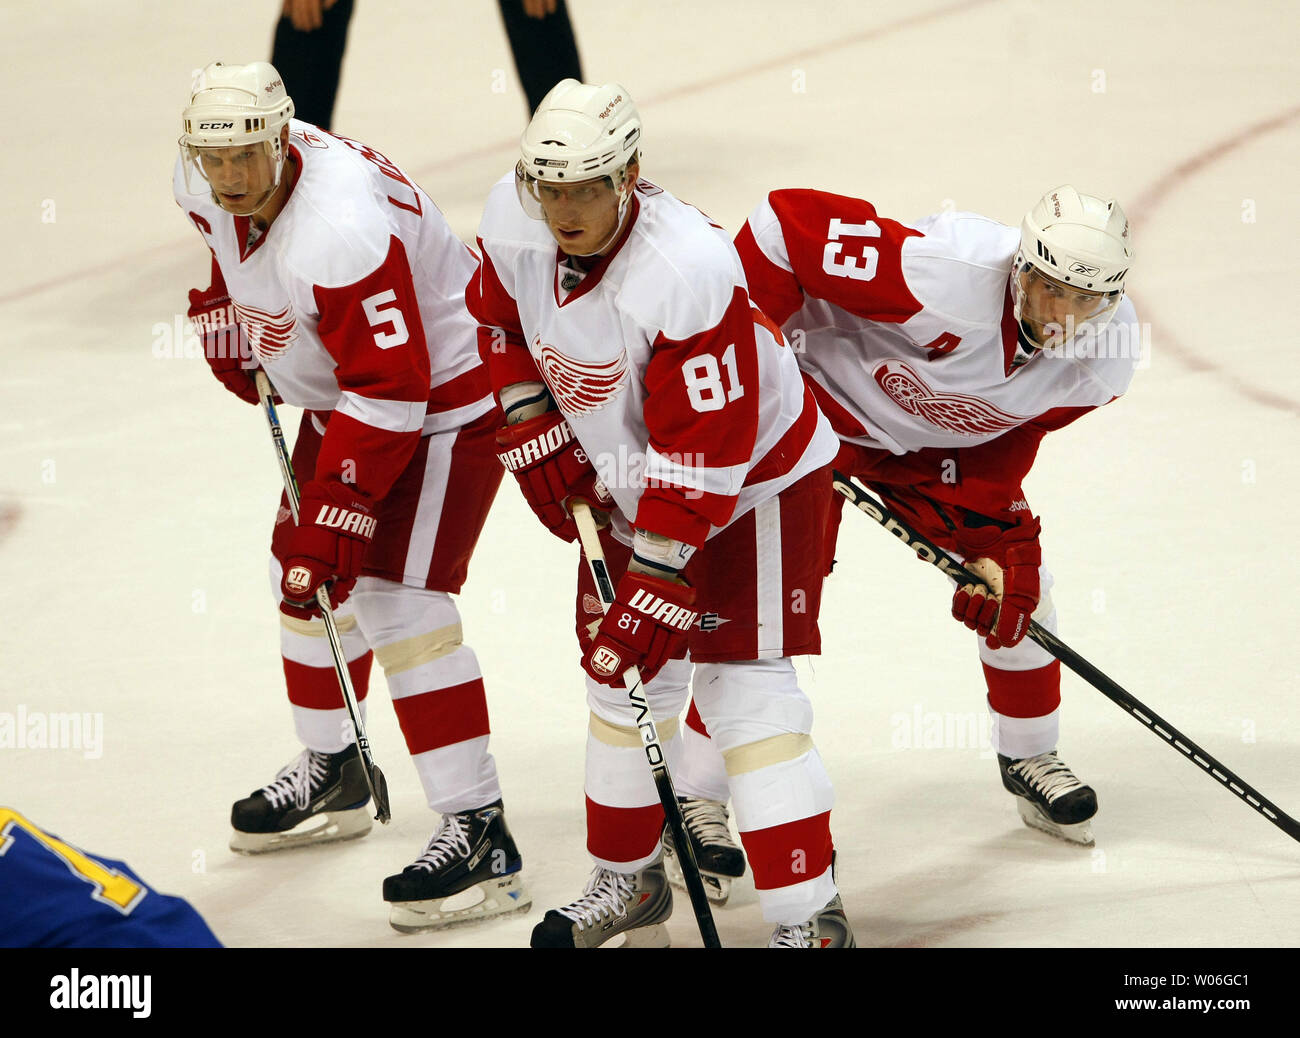 Detroit Red Wings players (L to R) Nicklas Lidstrom of Sweden, Marian Hossa of the Slovak Republic and Pavel Datsyuk of Russia wait for the drop of the puck in the St. Louis Blues zone during the first period at the Scottrade Center in St. Louis on October 22, 2008. (UPI Photo/Bill Greenblatt) Stock Photo